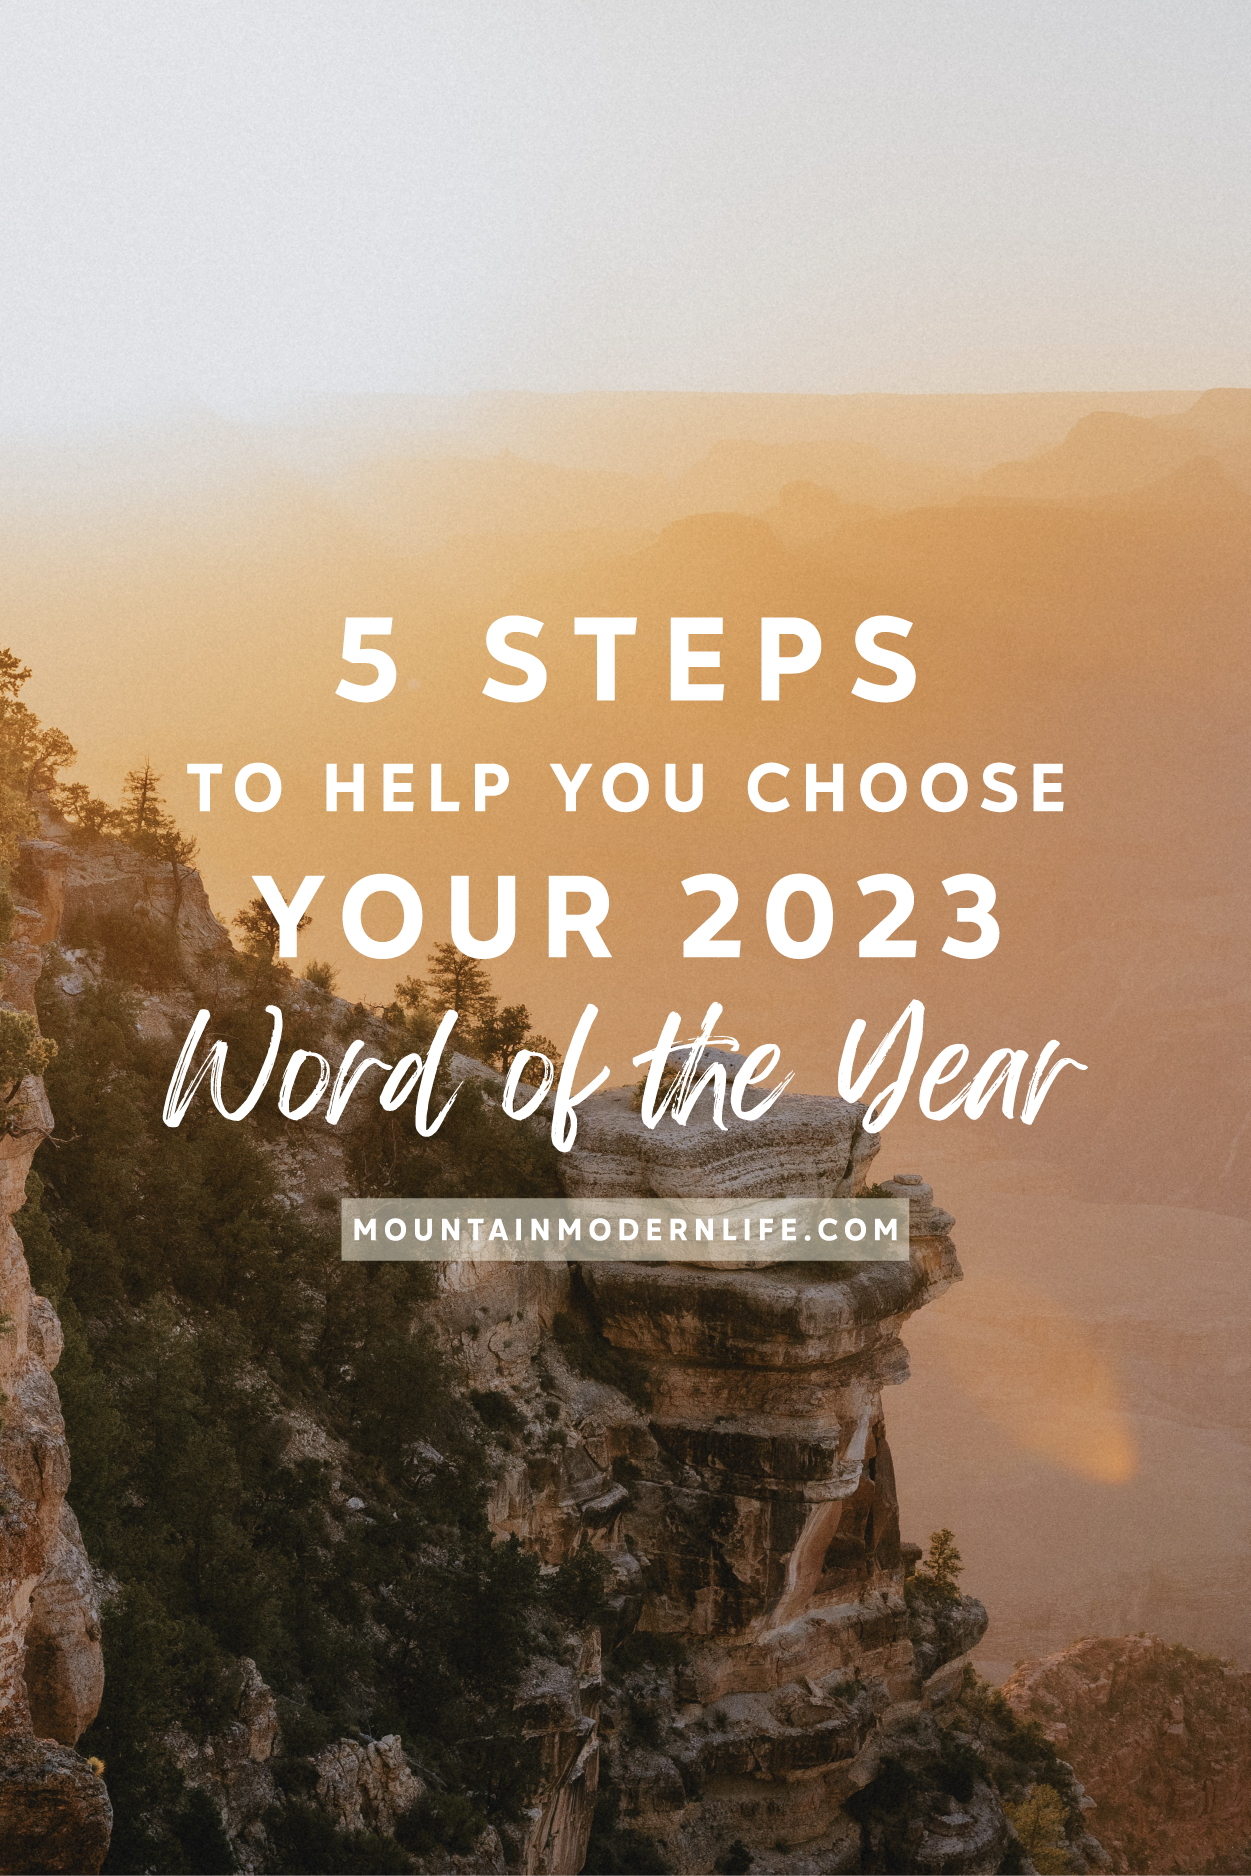 5 Steps to help you choose your Word of the Year